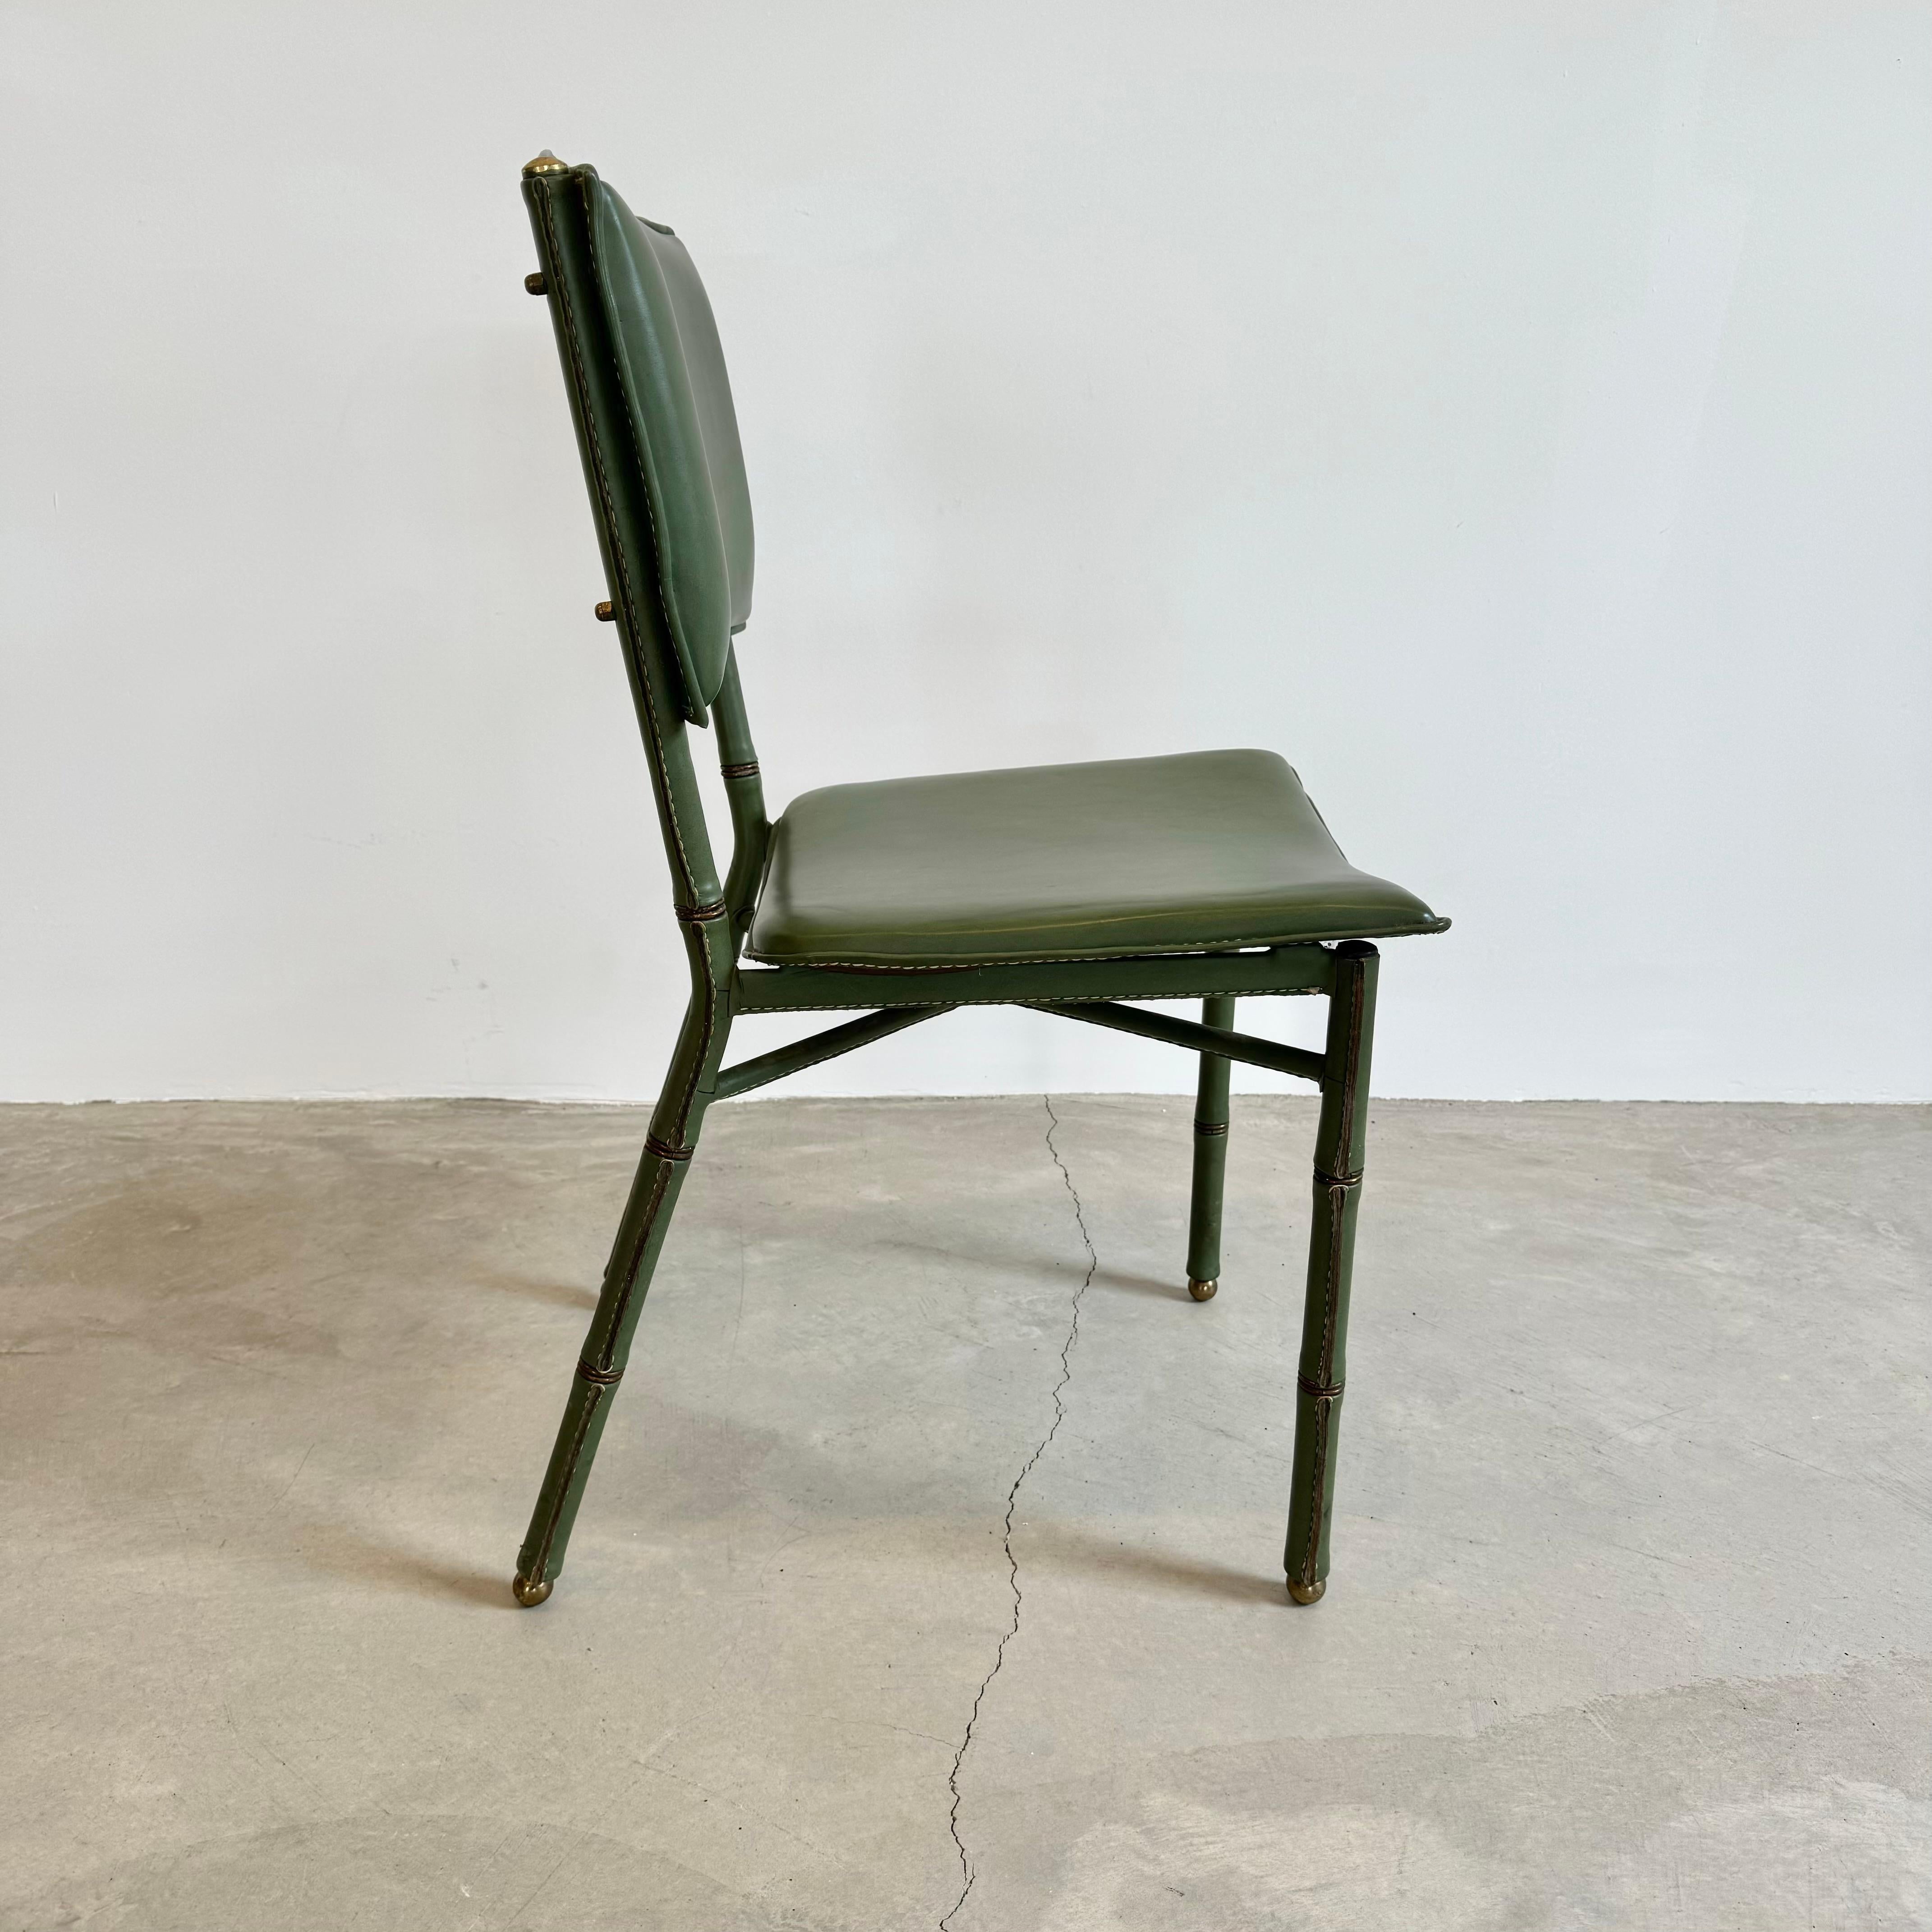 Mid-20th Century Jacques Adnet Green Leather Chairs, Circa 1950s, France For Sale